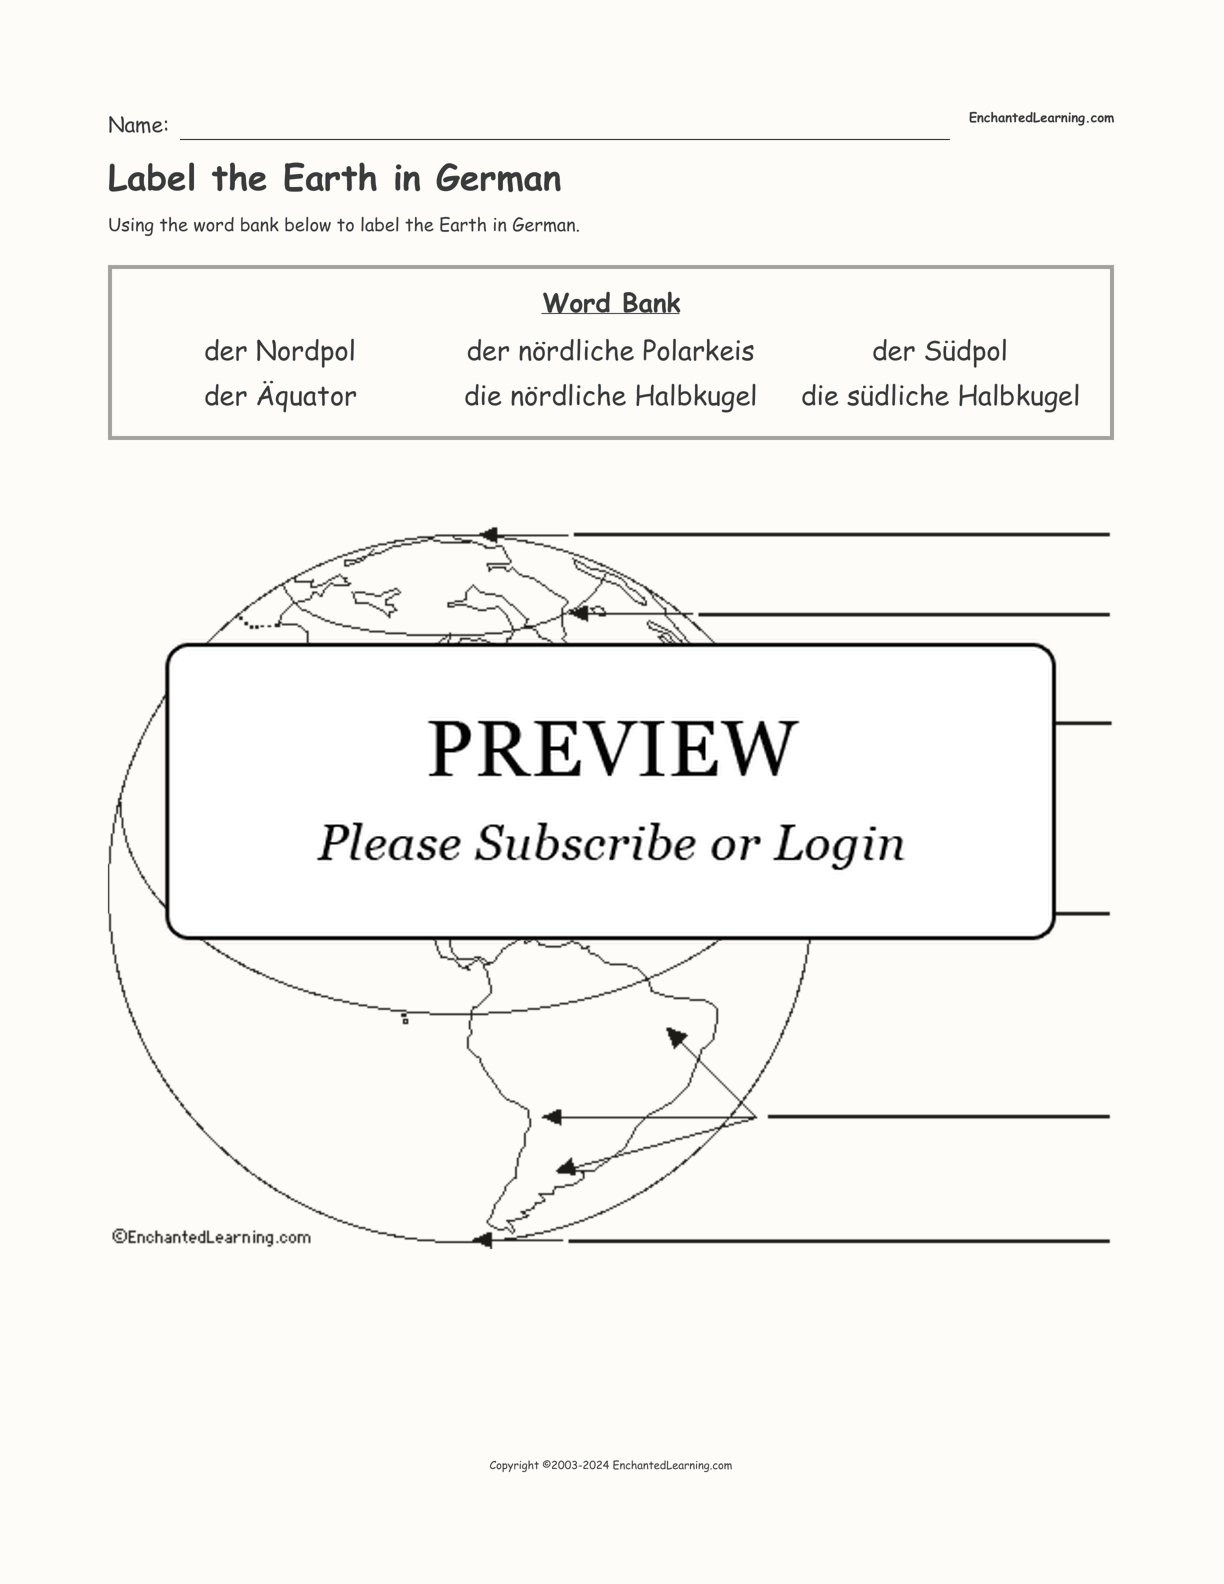 Label the Earth in German interactive worksheet page 1